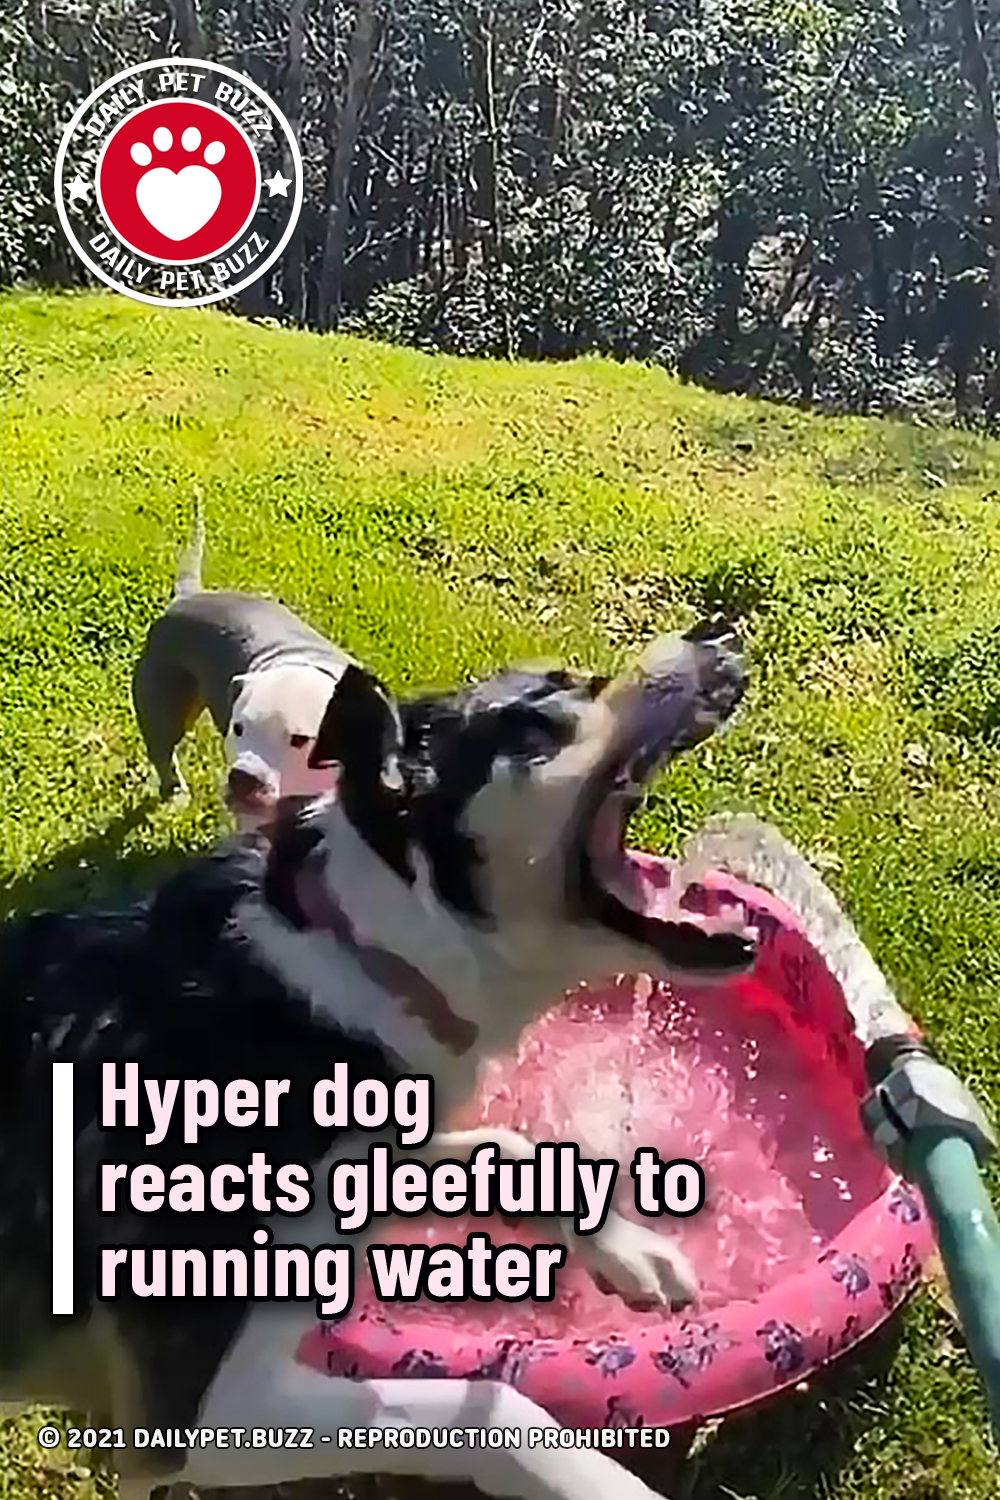 Hyper dog reacts gleefully to running water